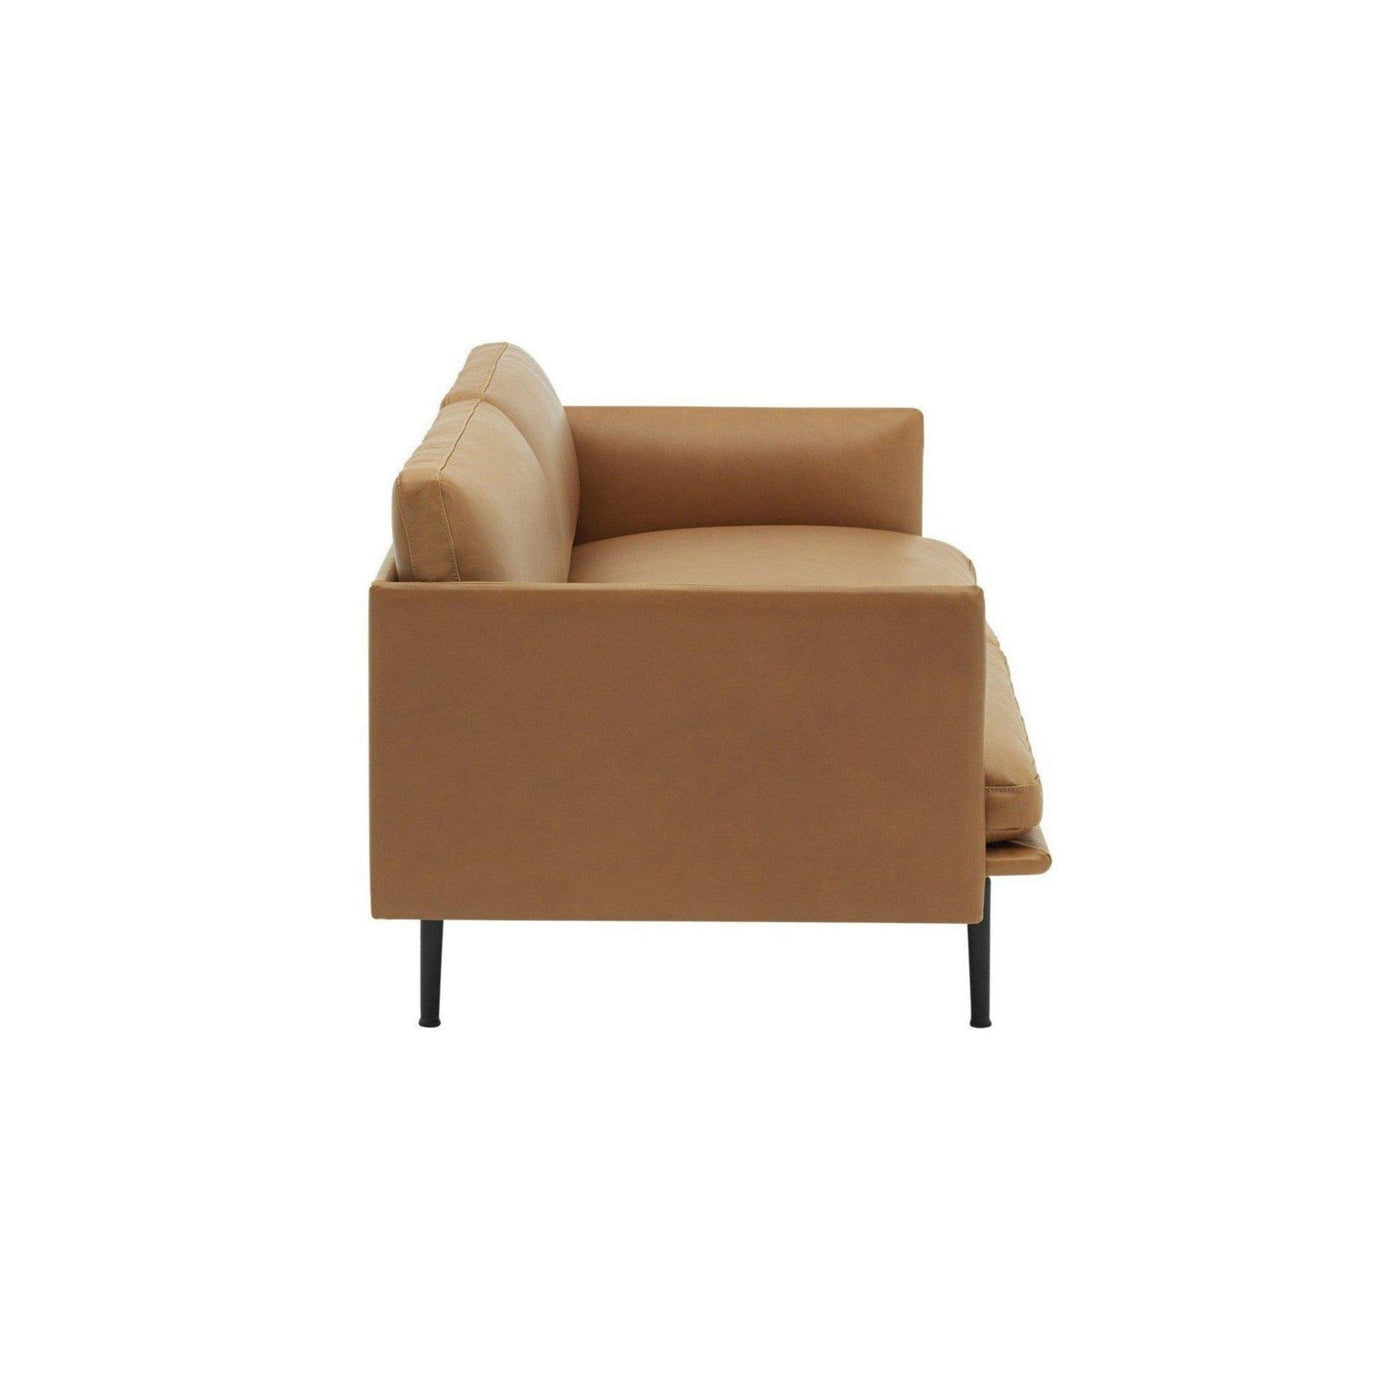 Muuto Outline 3 seater sofa with black legs. Available from someday designs. #colour_cognac-refine-leather